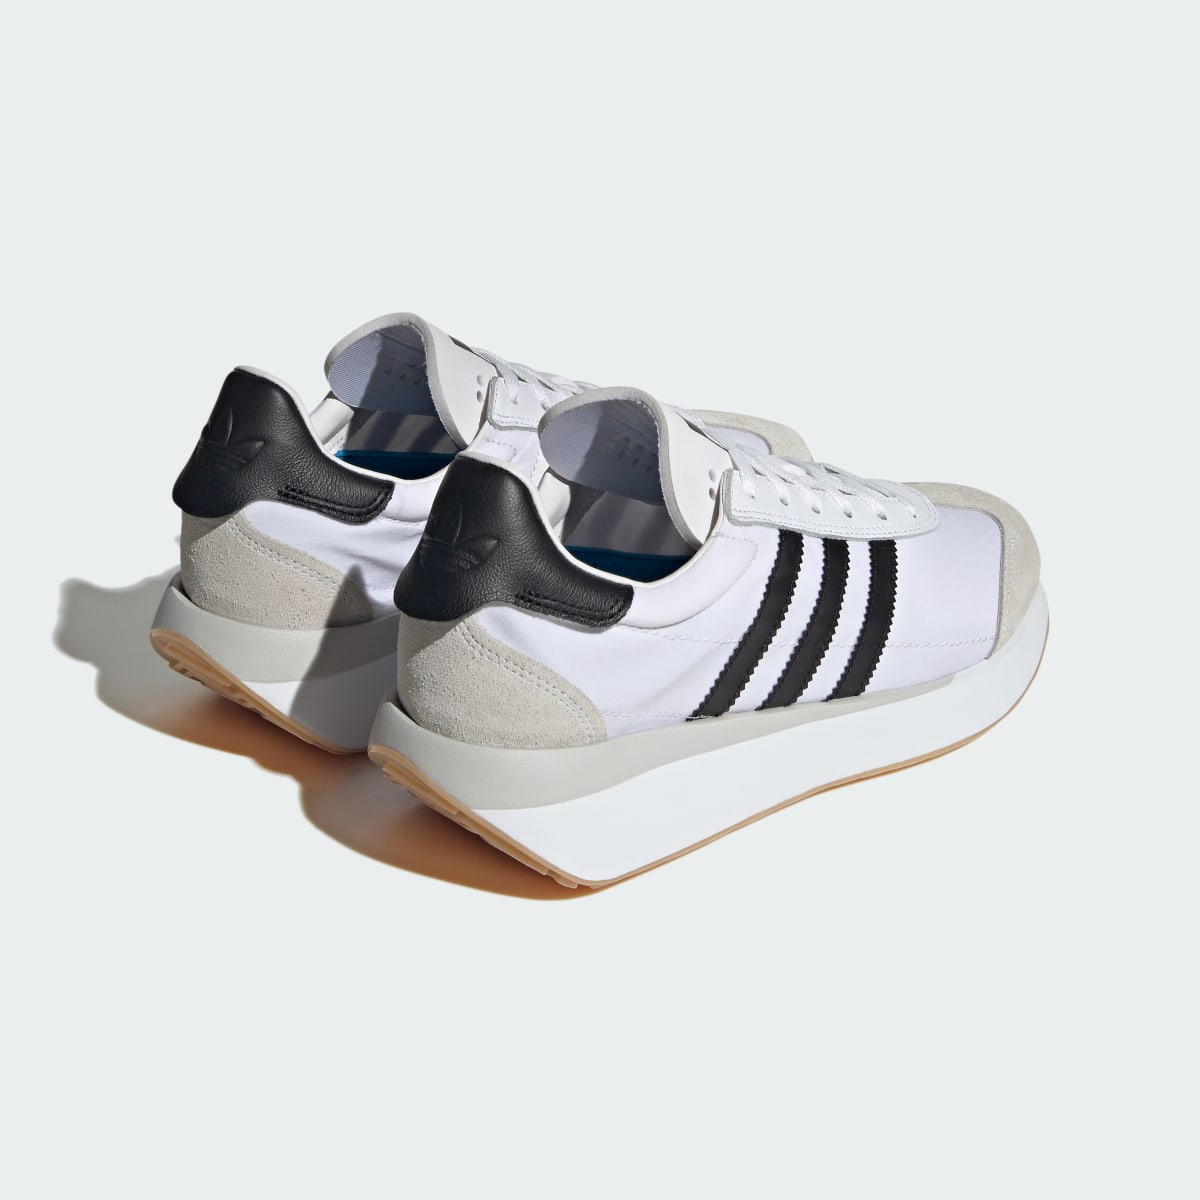 Adidas Country XLG Schuh. 6